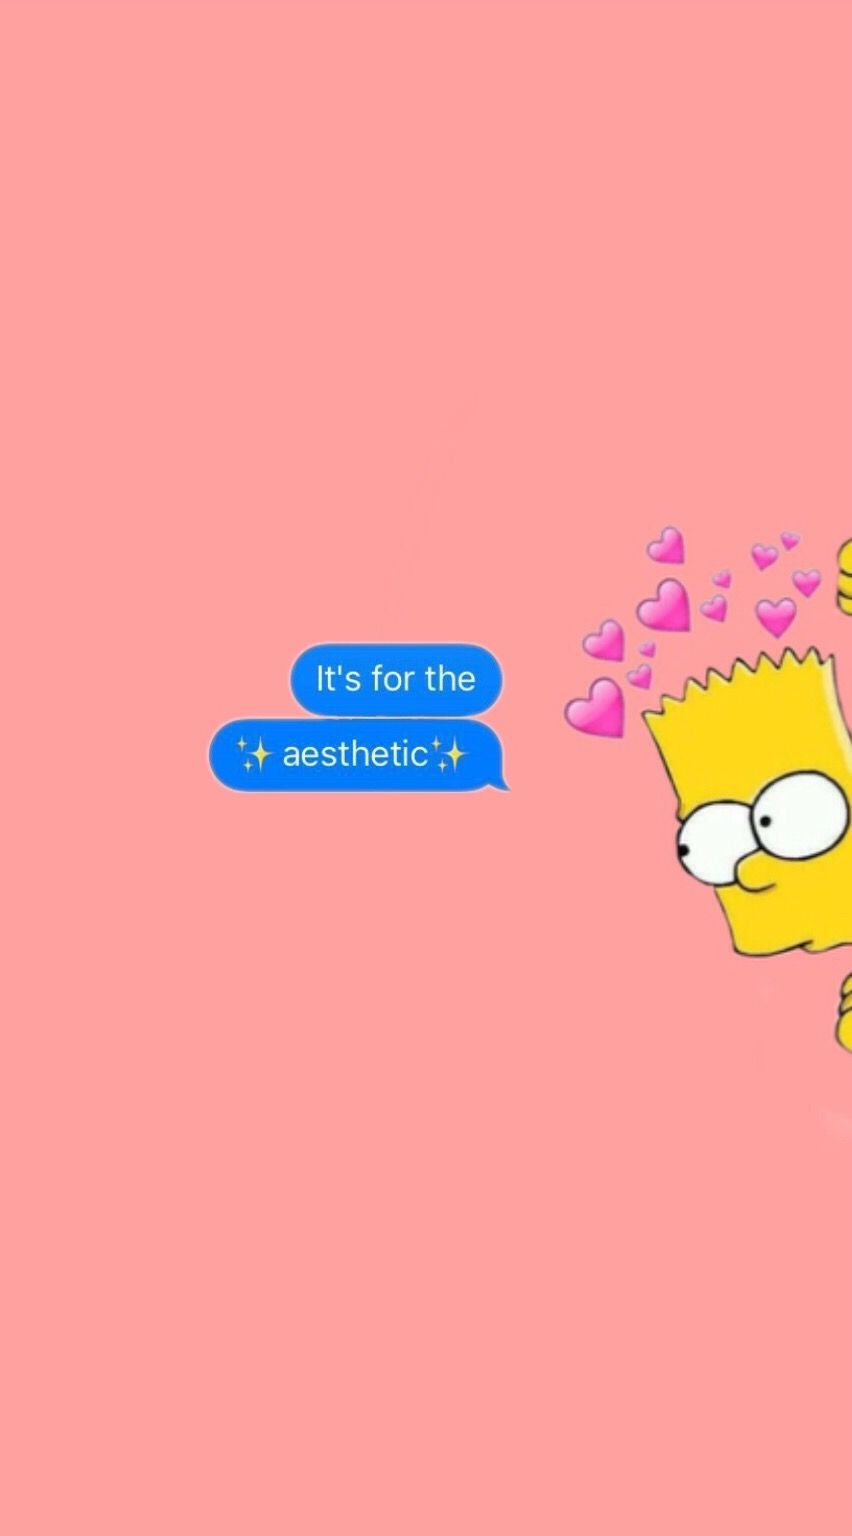 Bart Simpson wallpaper with a quote on a pink background - The Simpsons